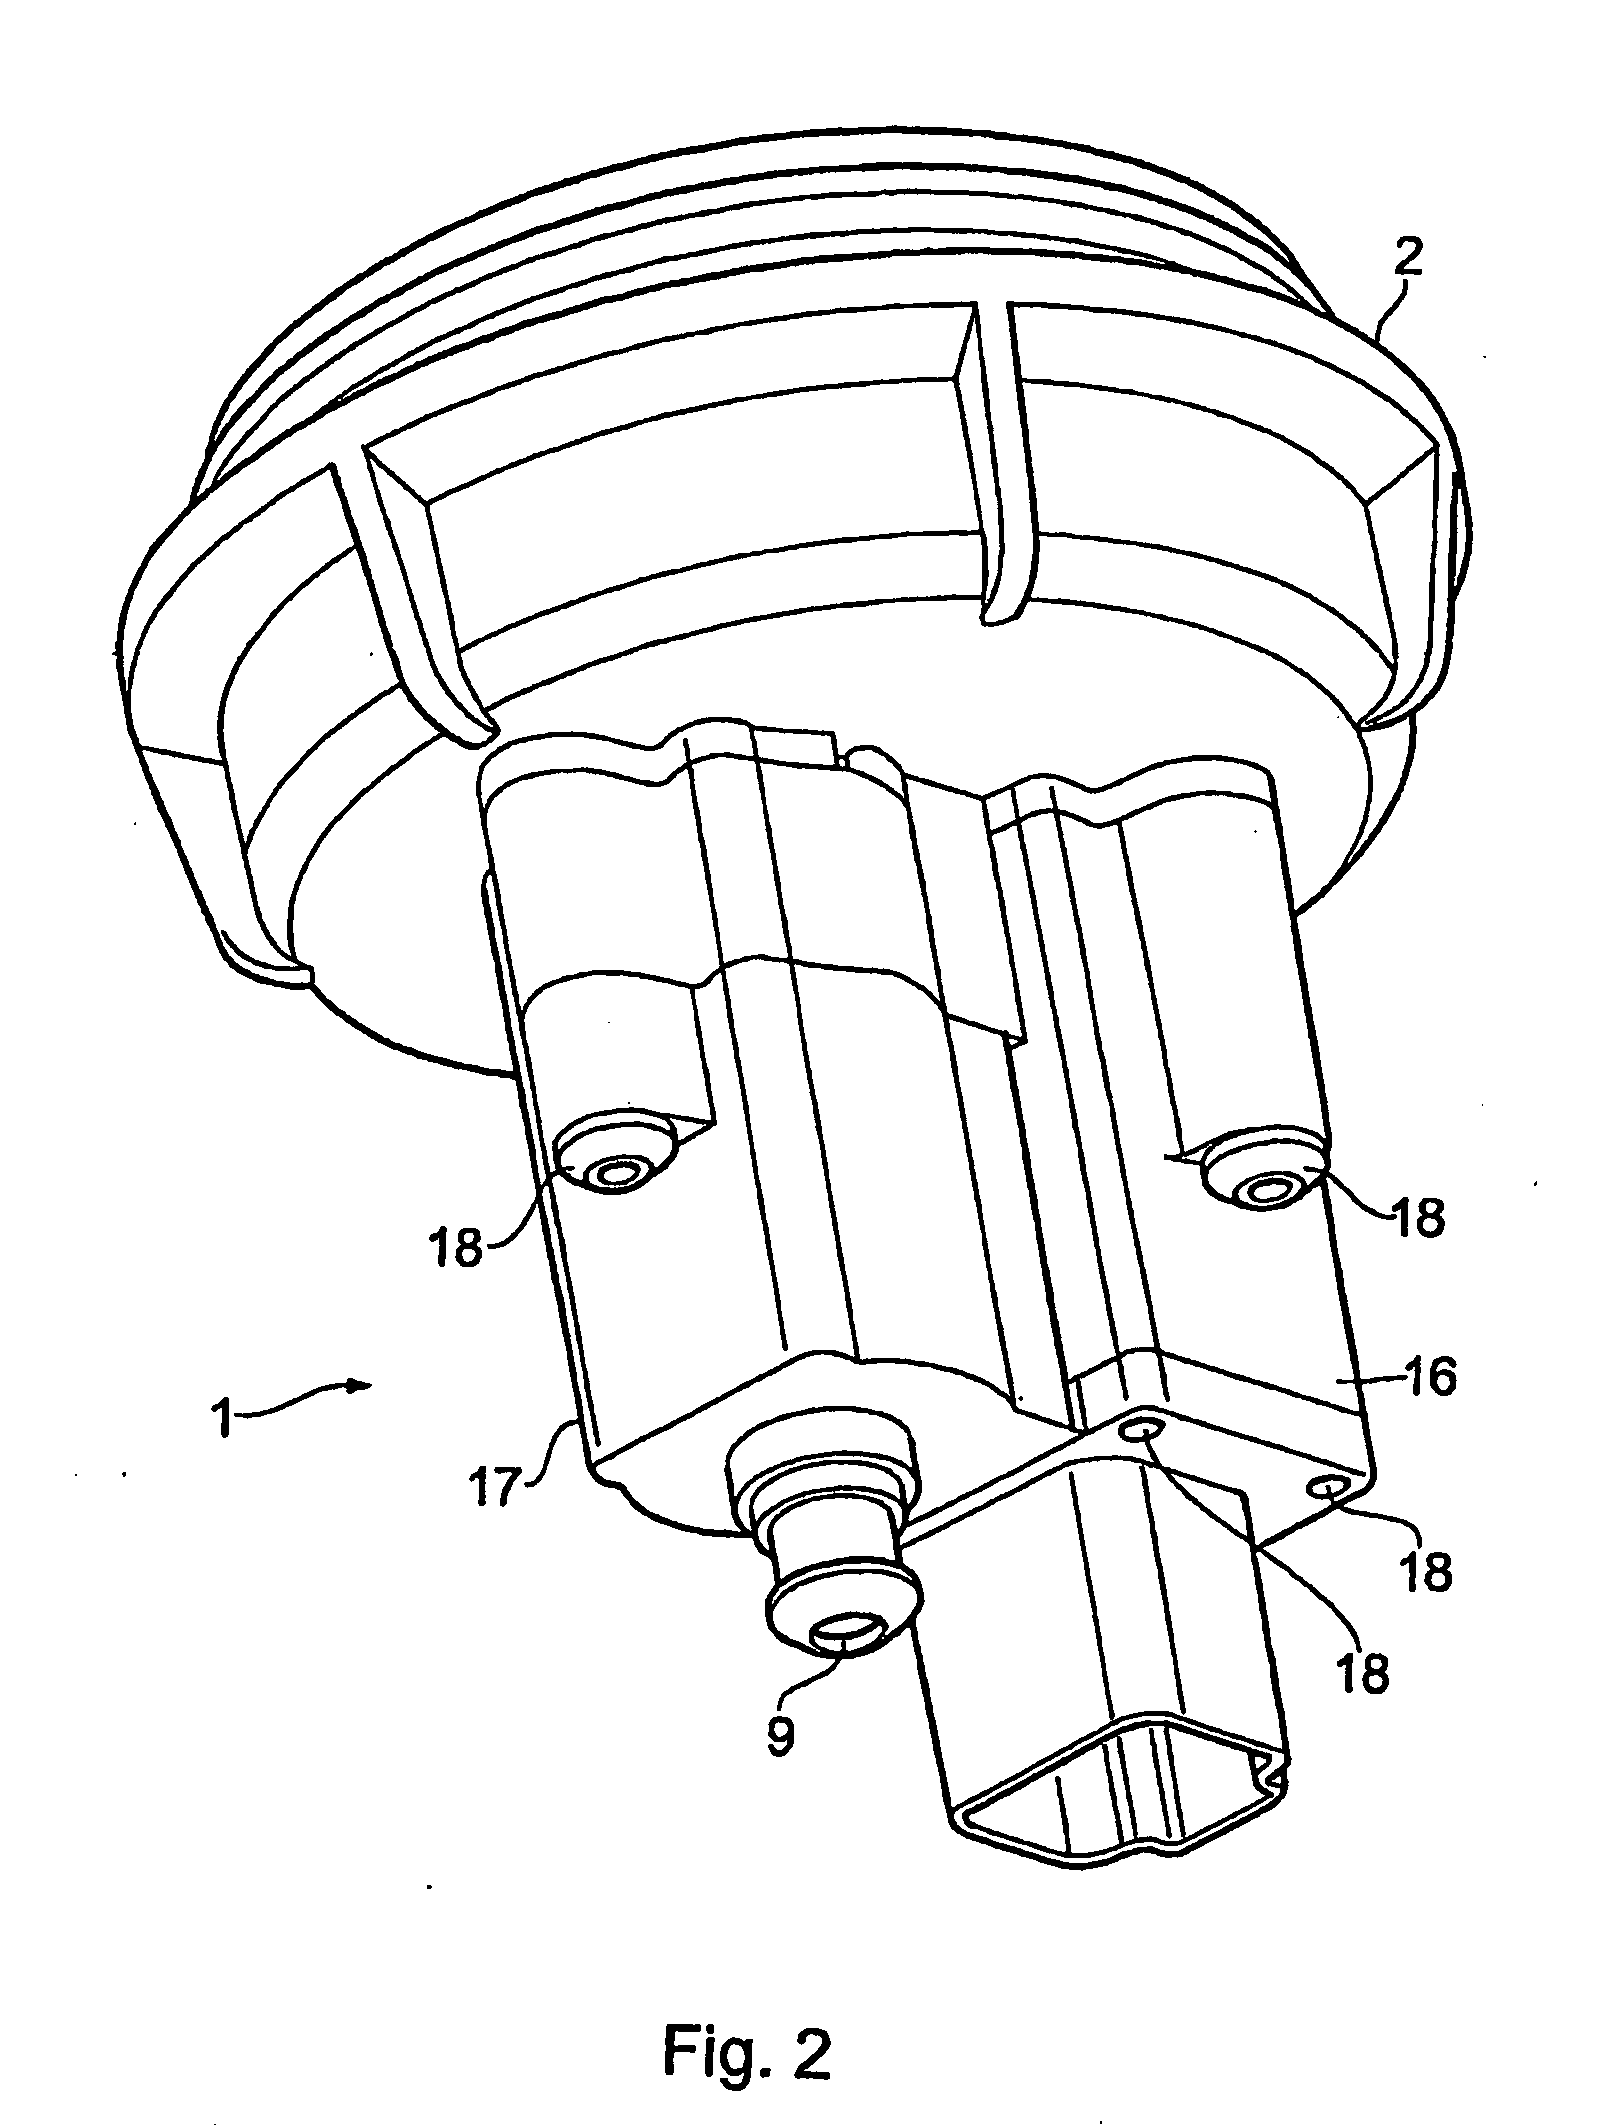 Water draining system for a fuel filter